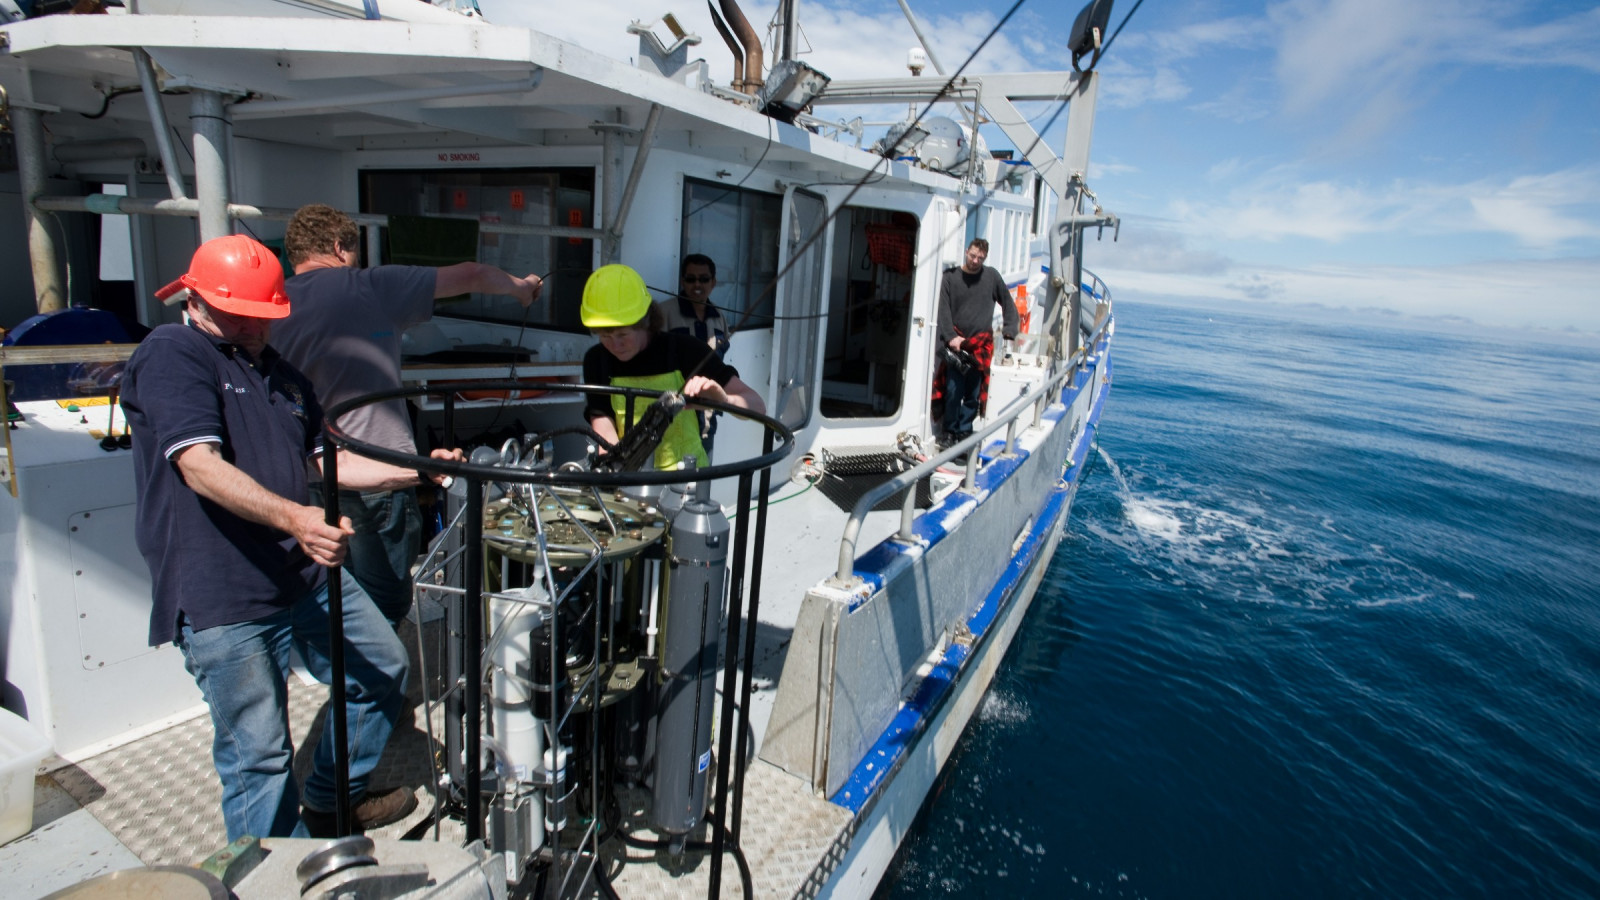 Crew on a boat at sea, collecting samples for ocean acidification studies.